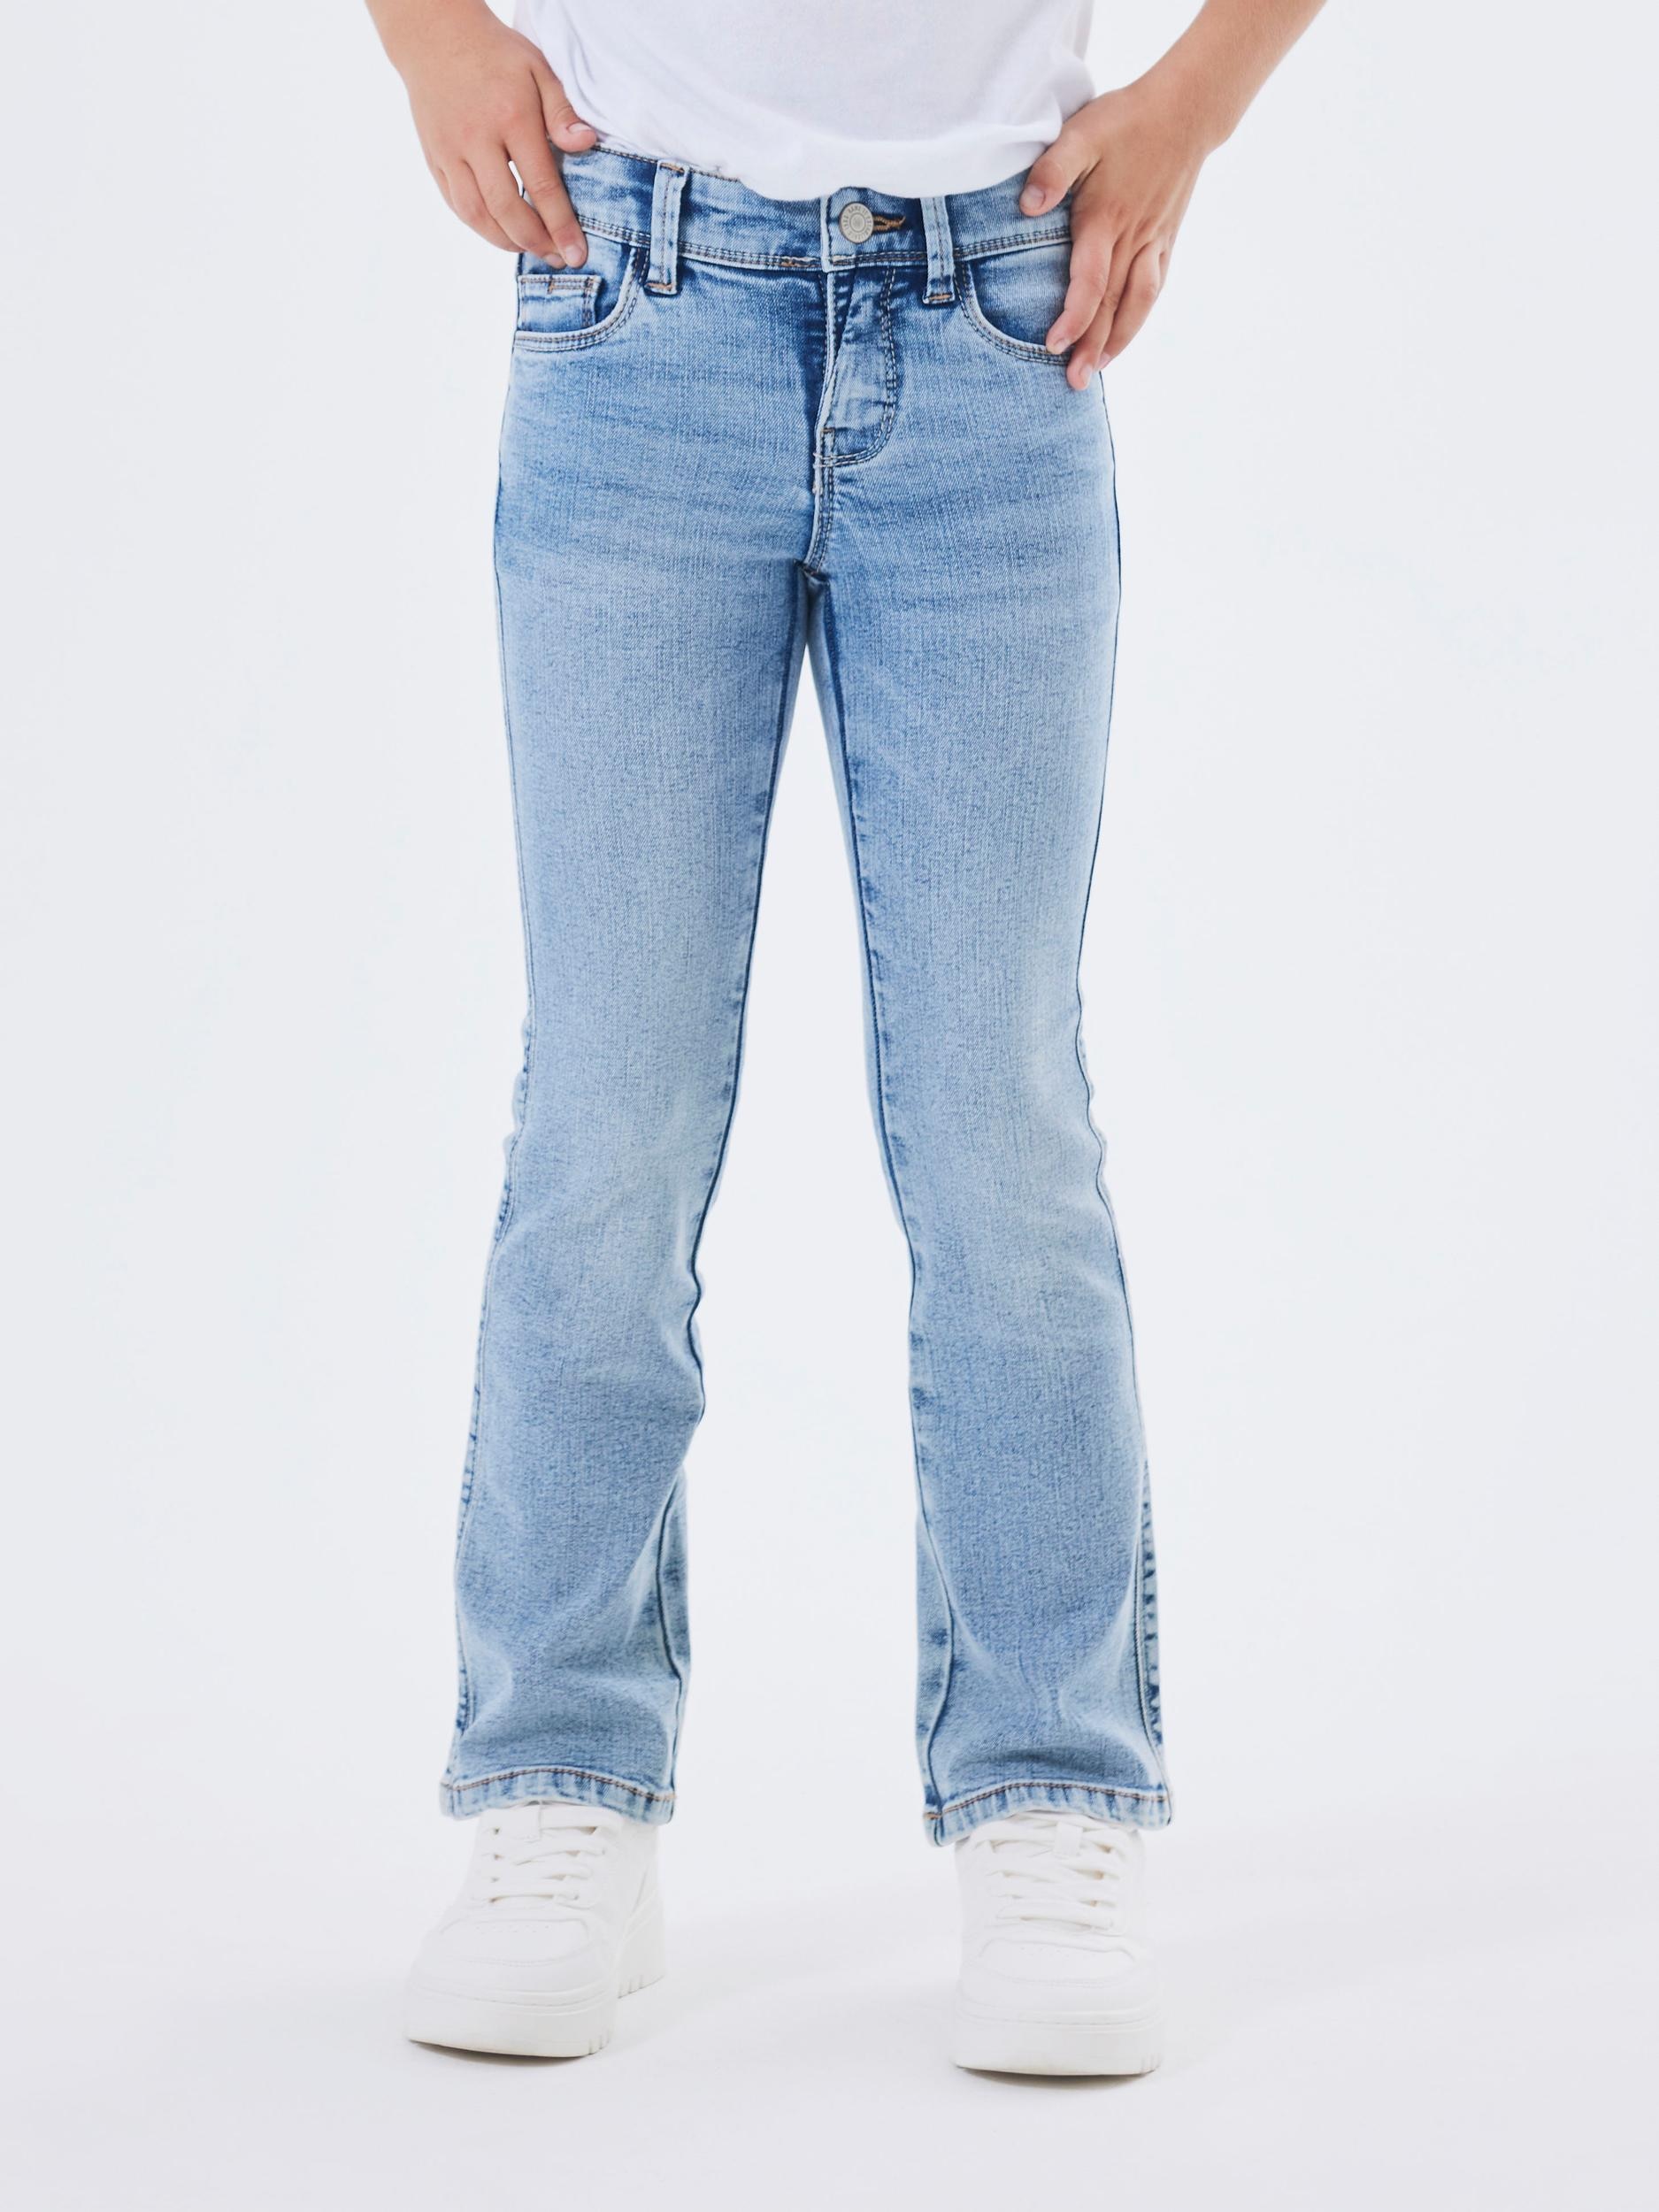 Stretch It »NKFPOLLY Name NOOS«, bestellen JEANS BOOT 1142-AU mit Bootcut-Jeans SKINNY